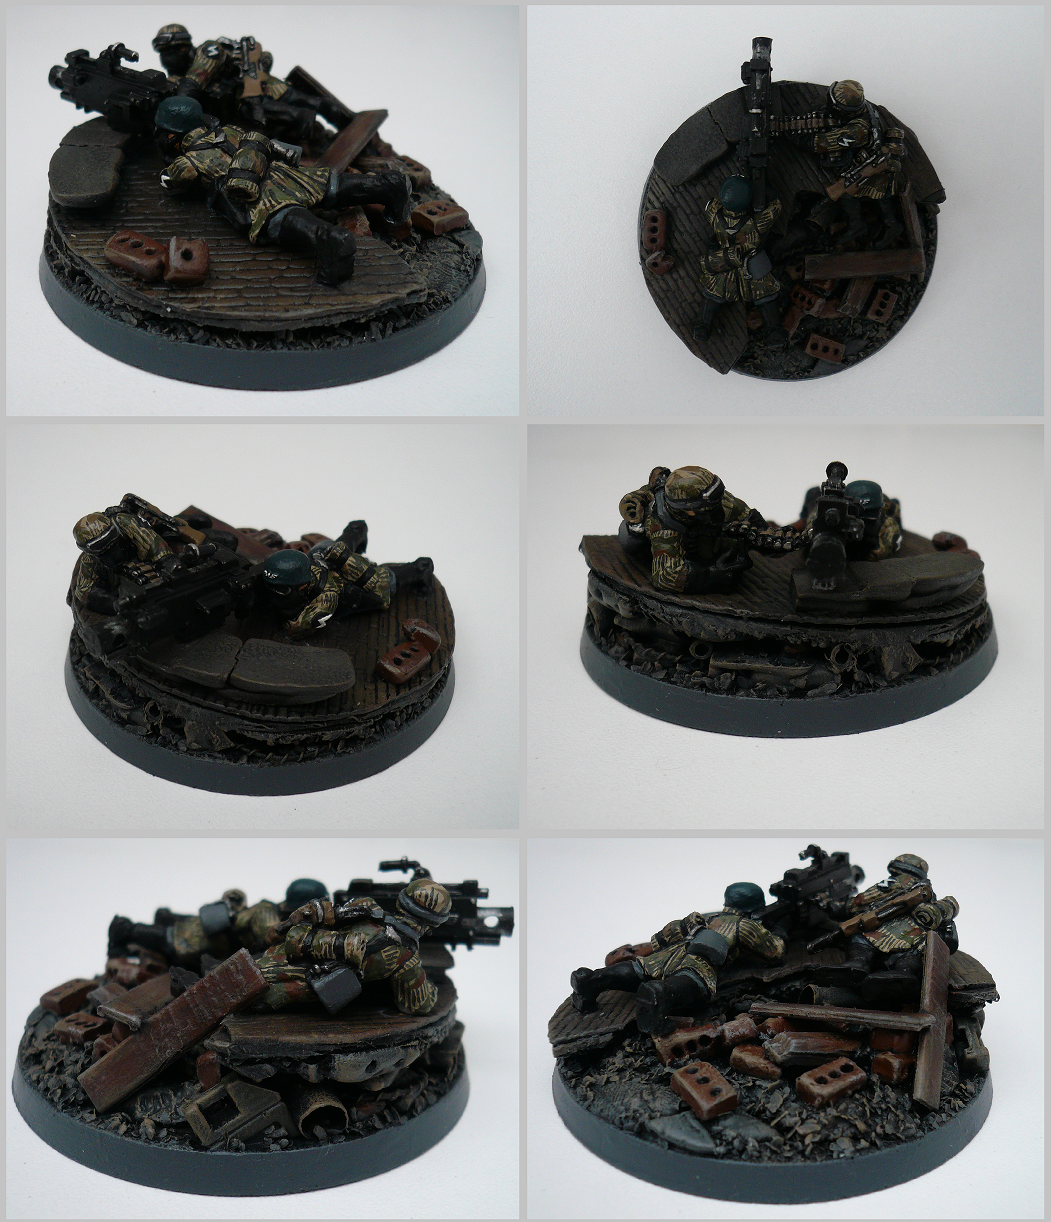 Astra Militarum, Heavy Bolter, Imperial Guard, Paratroopers, Steel Legion, World War 2